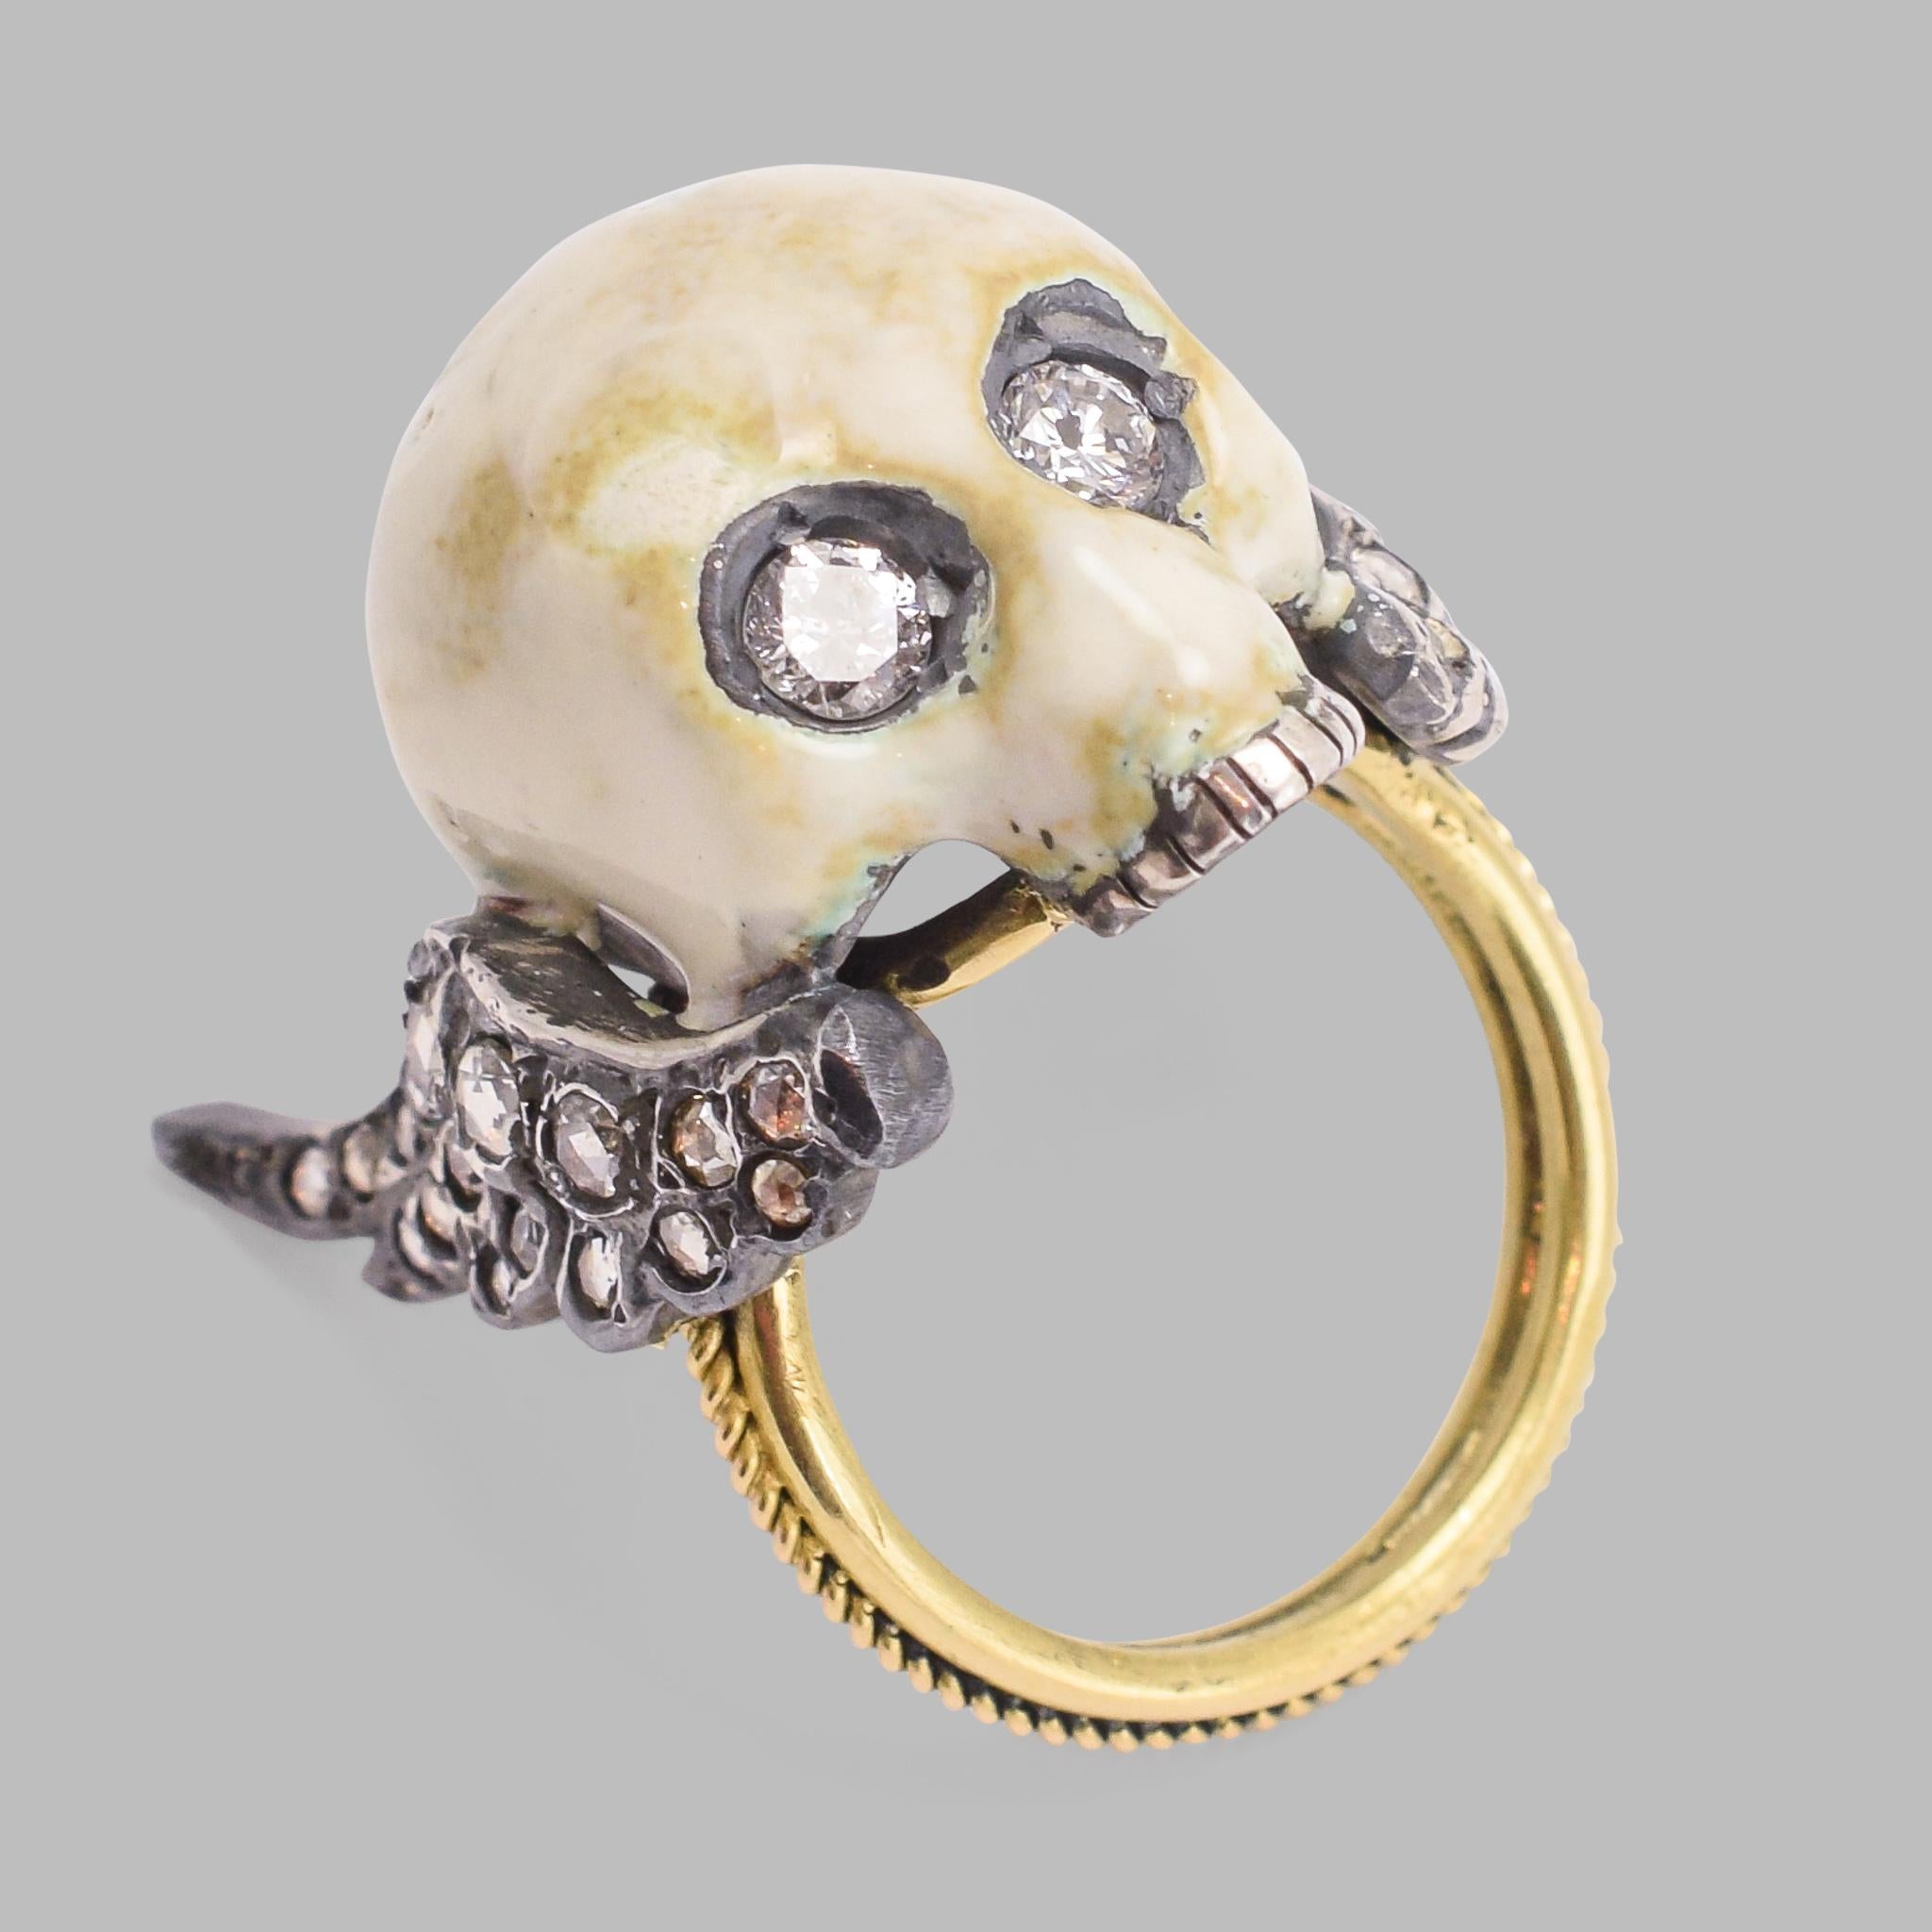 BL Bespoke Collection

Memento Mori - remember you will die. 

A spectacular statement piece crafted by Gaetano Chiavetta in his trademark style. This ring is modelled as a skull with diamond eyes, finished in a strikingly realistic white/yellow